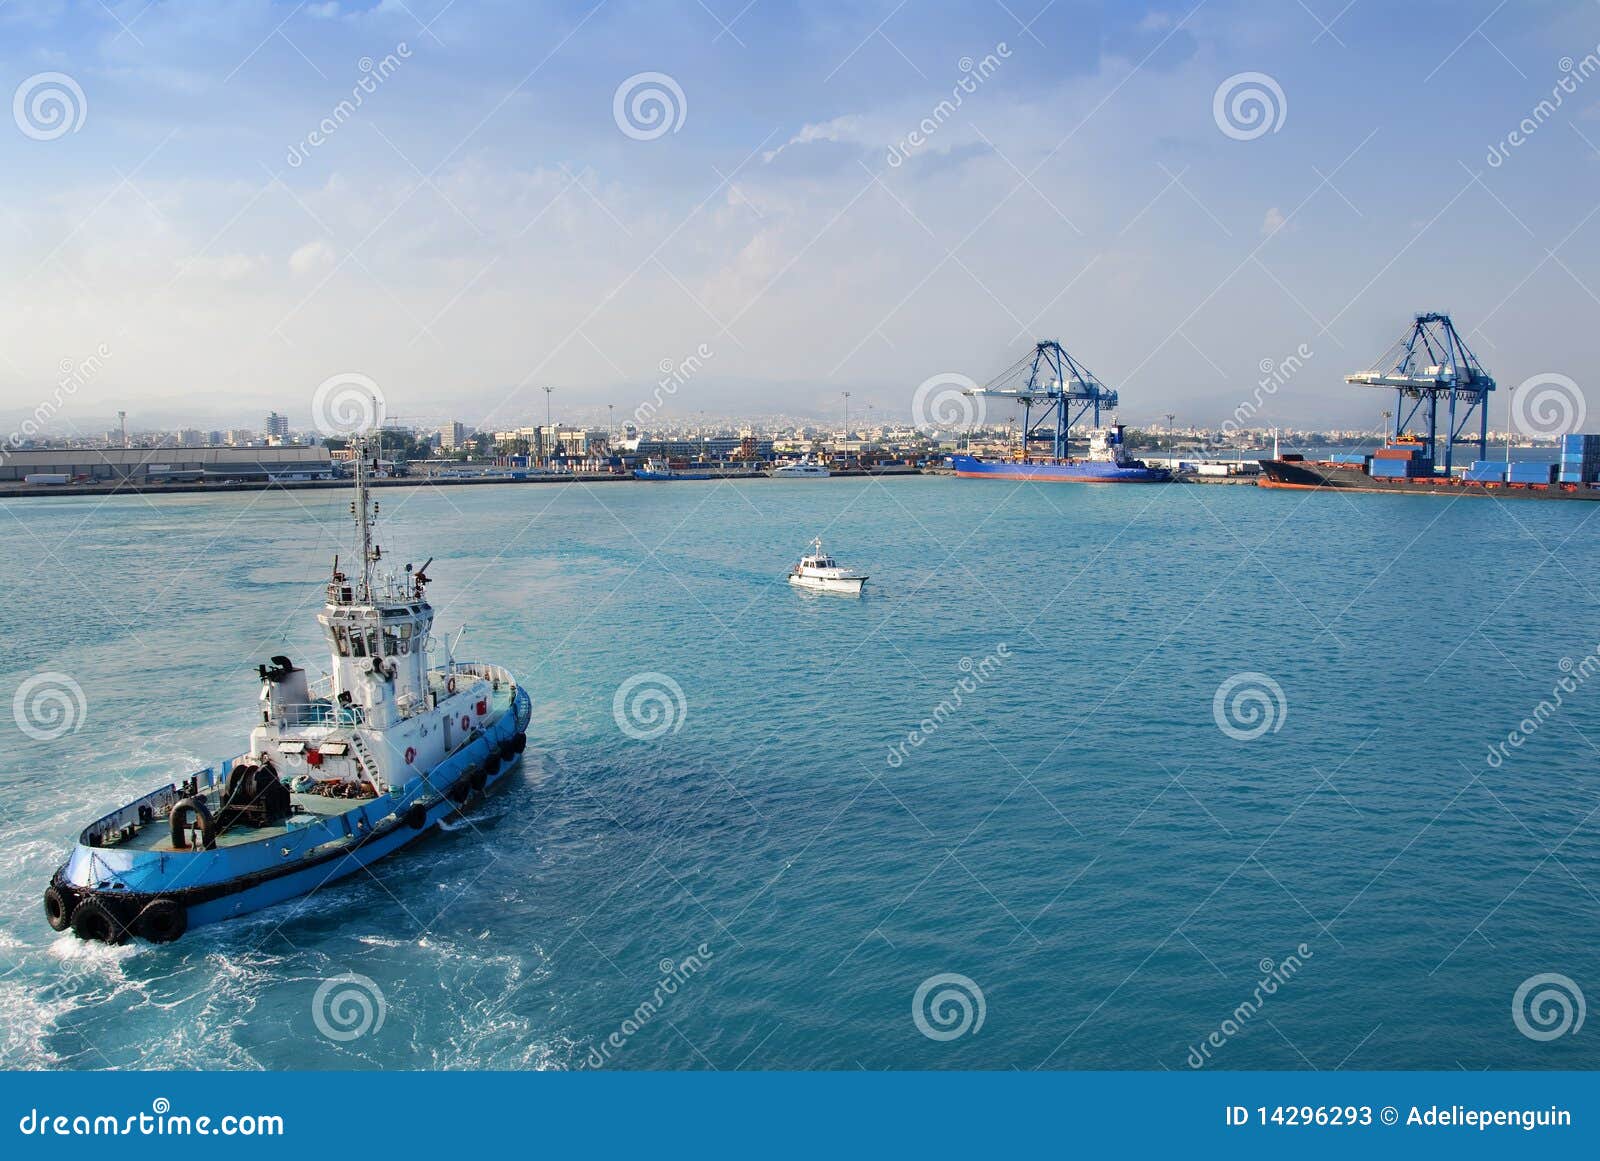 tugboat nears container port, cyprus